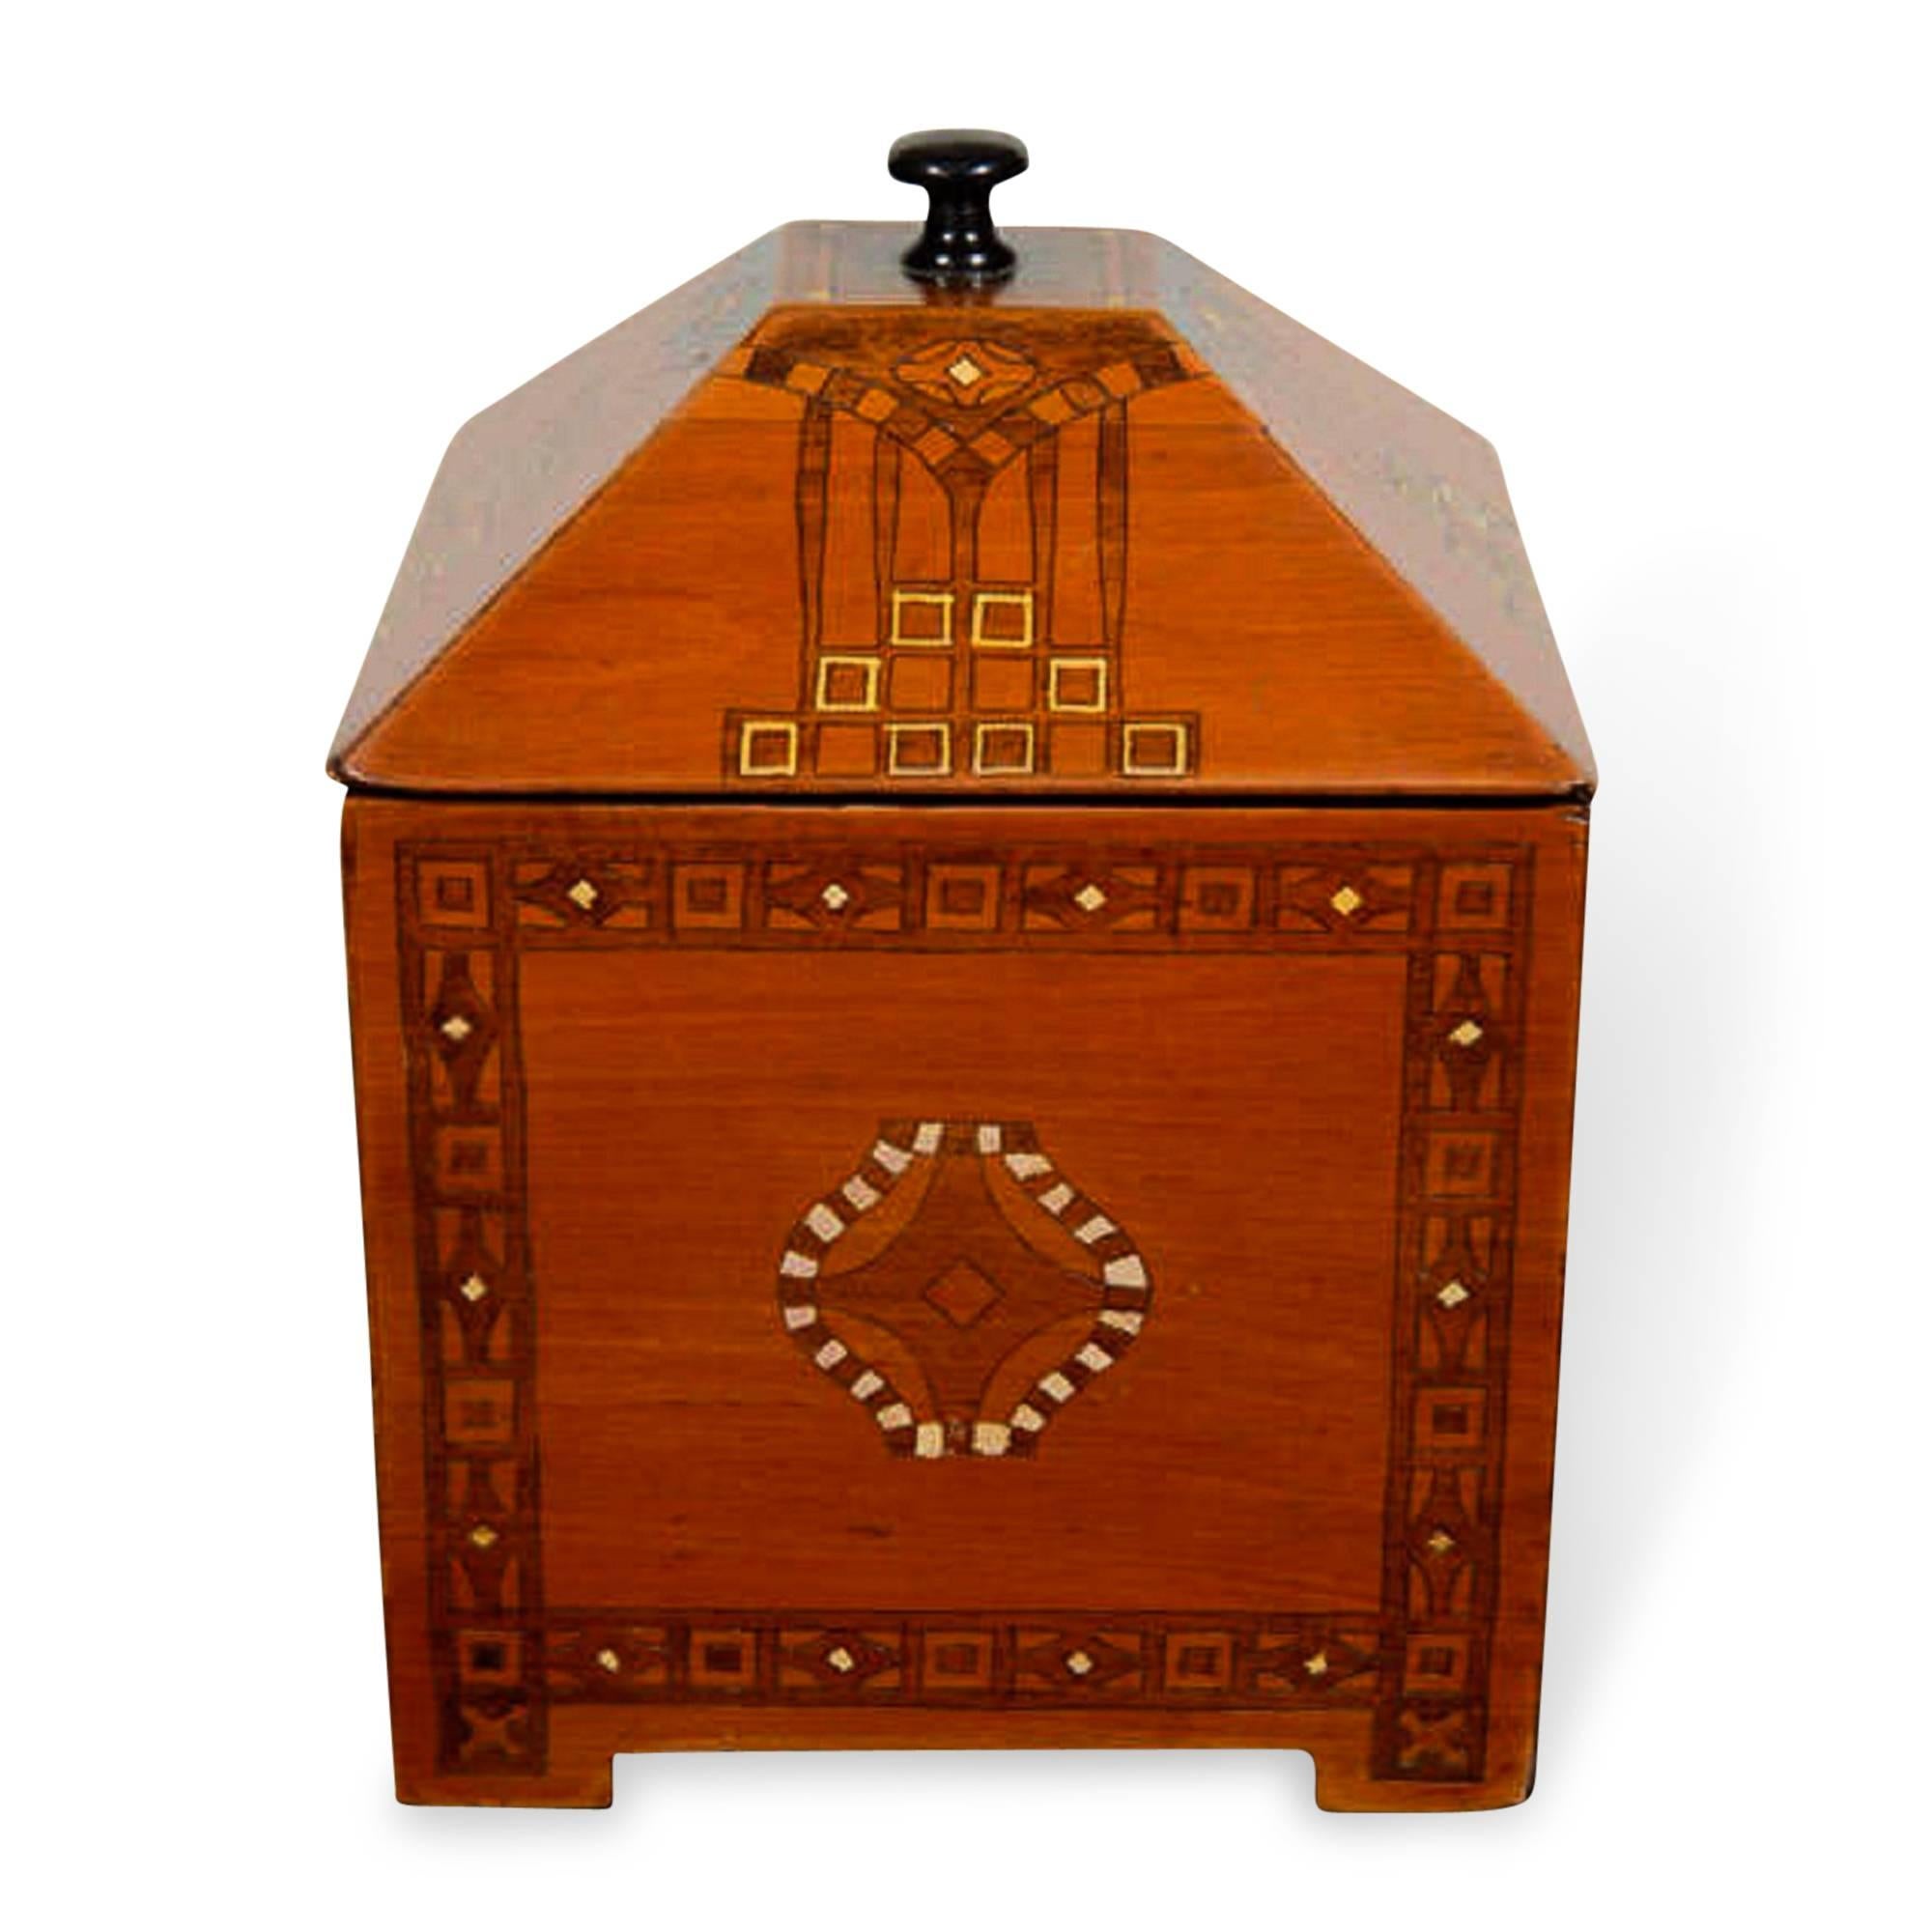 Small wooden box with decorative pattern created out of contrasting inlaid wood pieces, lidded. German, circa 1900. Measures: 5 in x 5 in, height 8 in. 